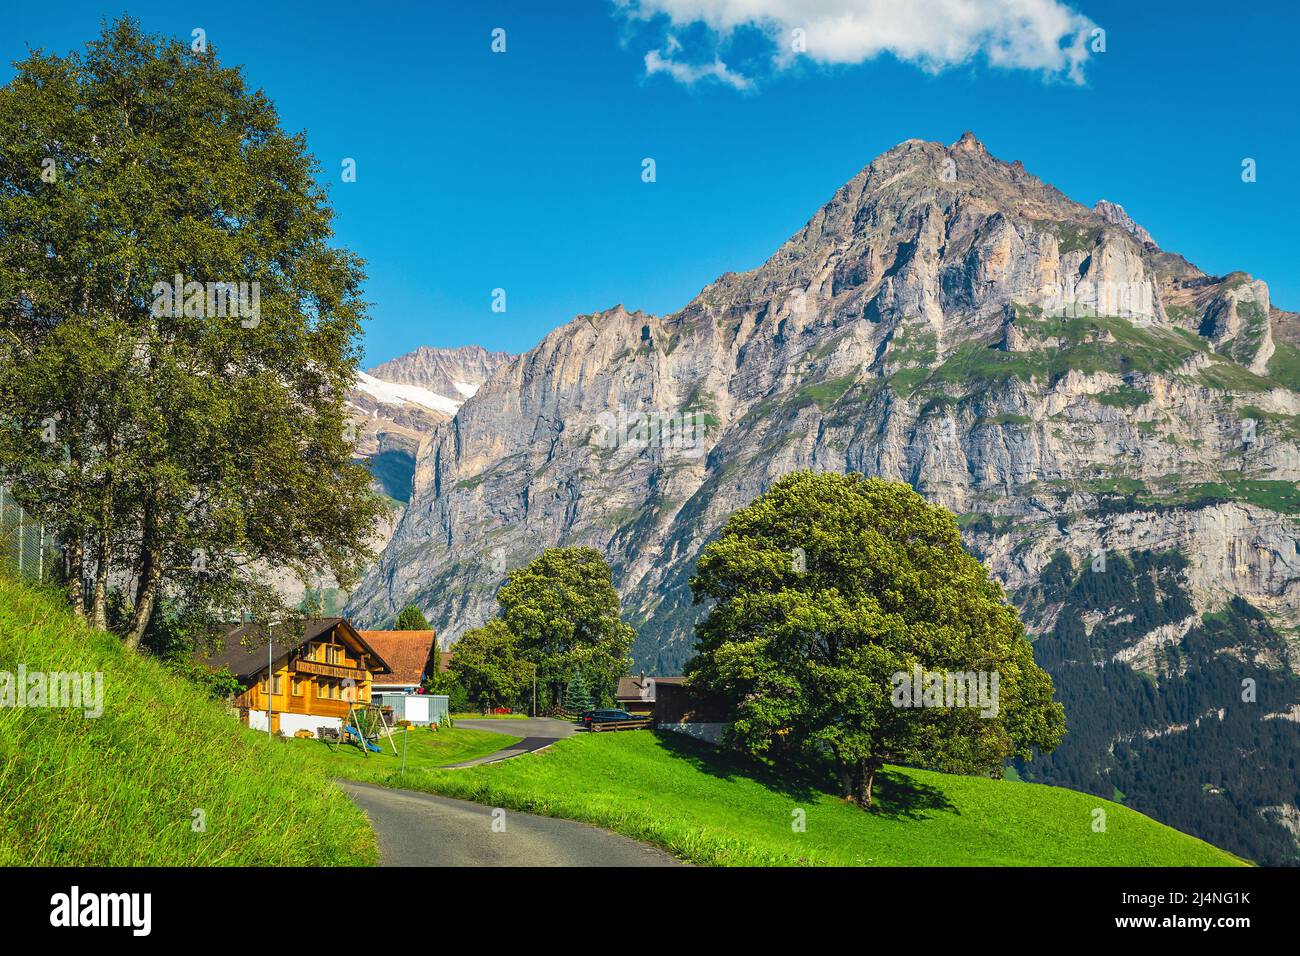 Wooden houses and green fields on the hill. Amazing view with high mountains, Grindelwald, Bernese Oberland, Switzerland, Europe Stock Photo